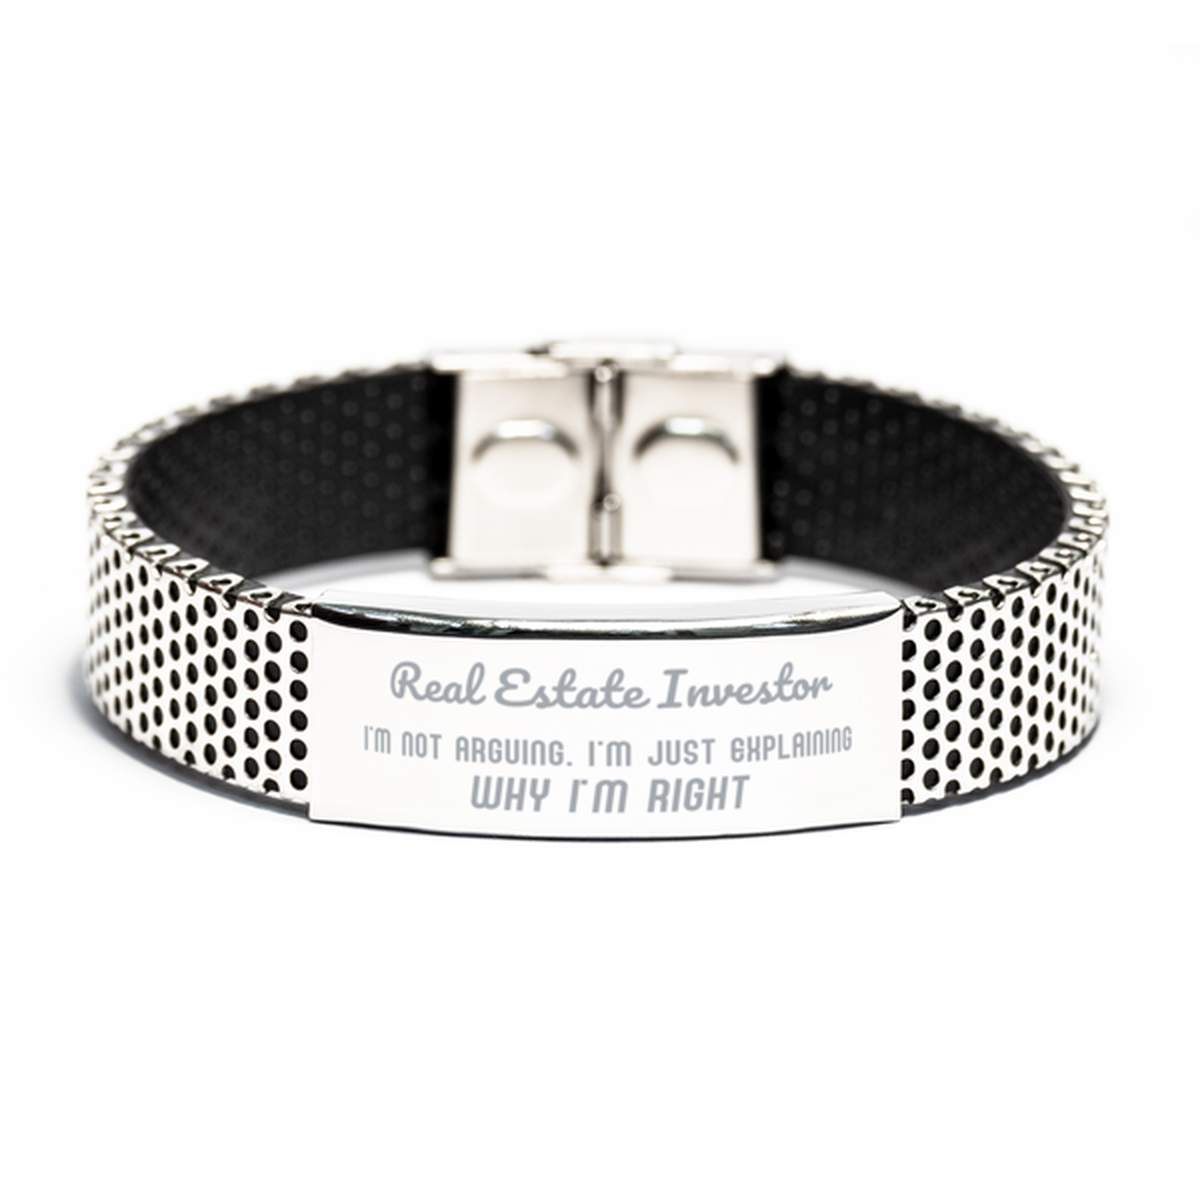 Real Estate Investor I'm not Arguing. I'm Just Explaining Why I'm RIGHT Stainless Steel Bracelet, Funny Saying Quote Real Estate Investor Gifts For Real Estate Investor Graduation Birthday Christmas Gifts for Men Women Coworker